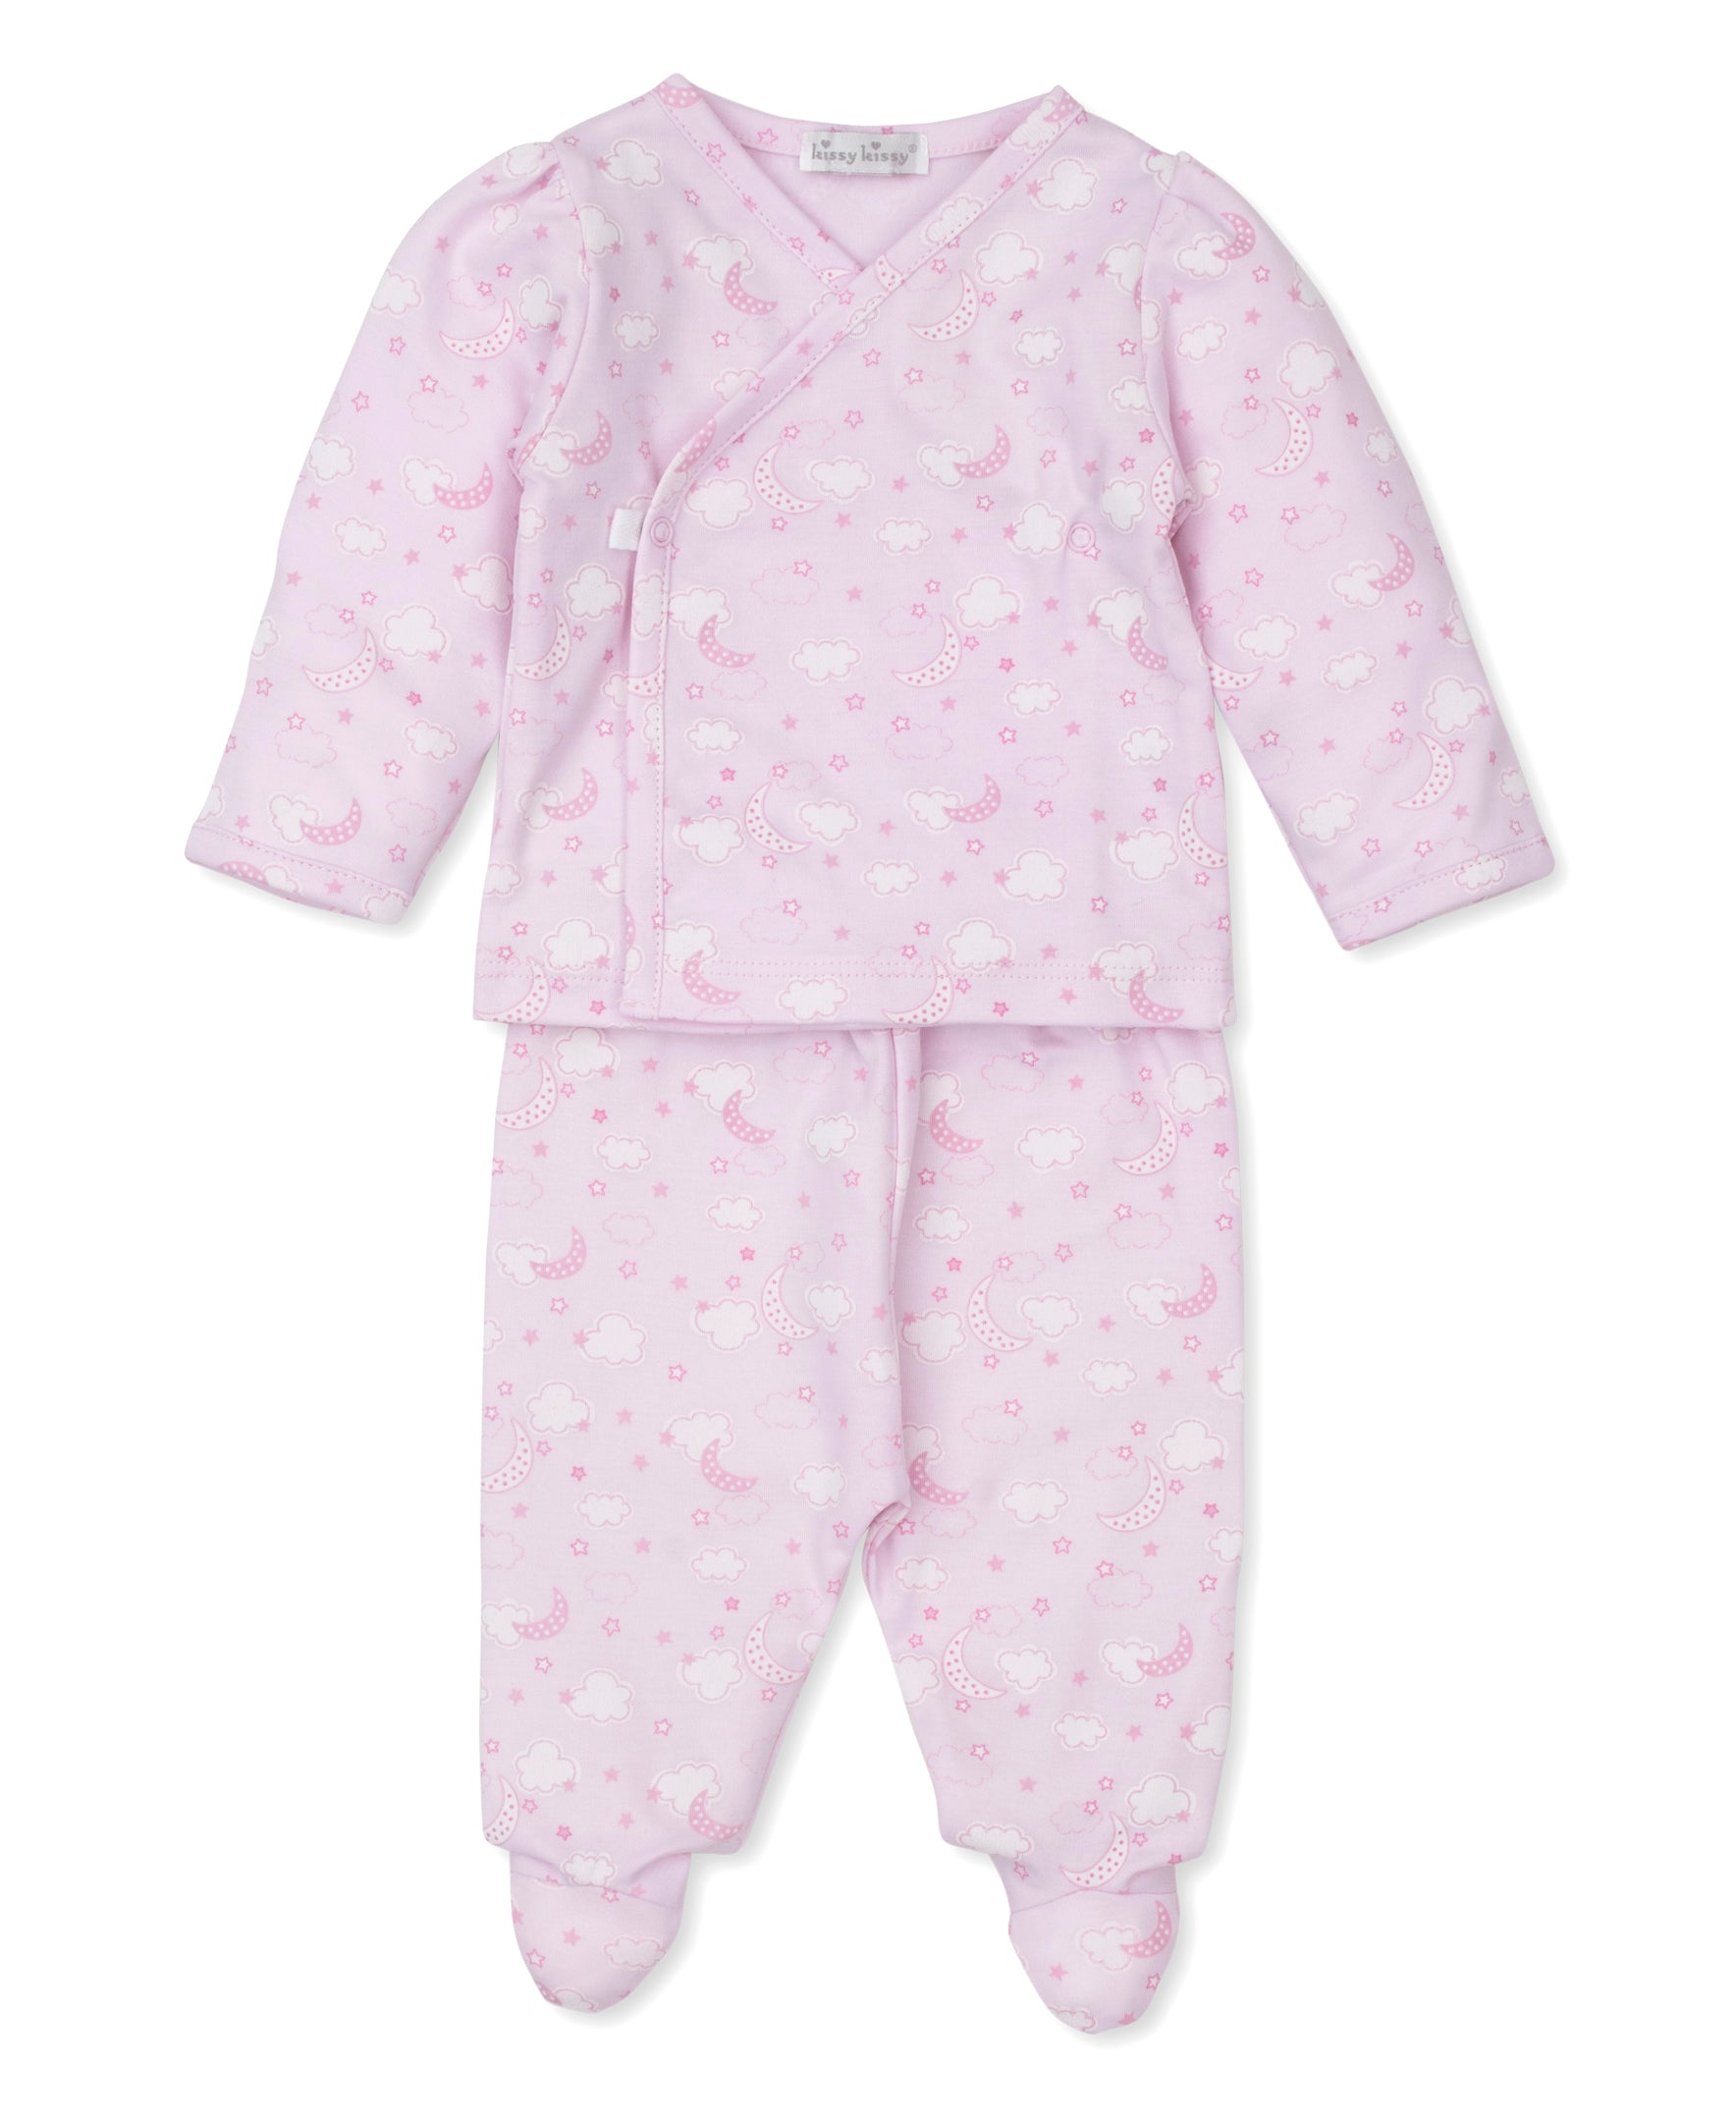 Night Clouds Pink Footed Pant Set - Kissy Kissy